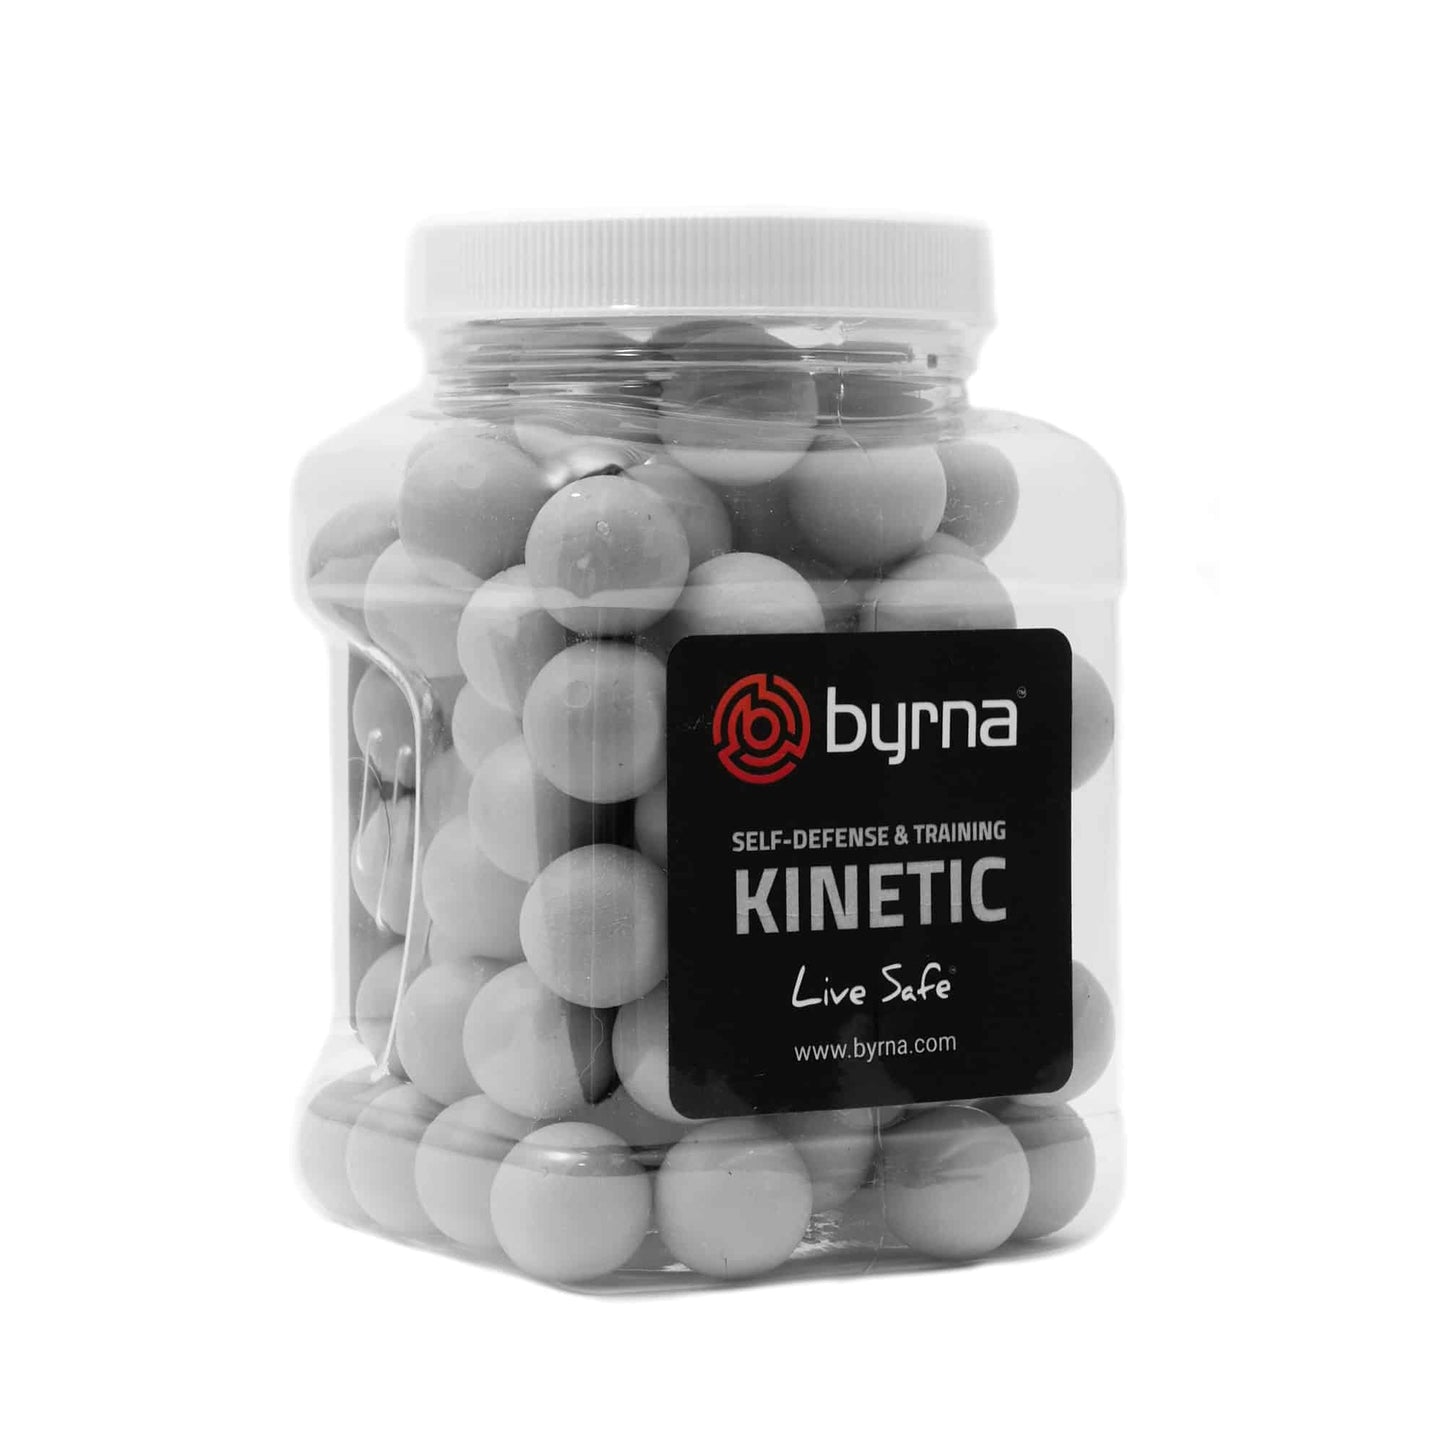 Byrna Kinetic Projectiles - 95 Count